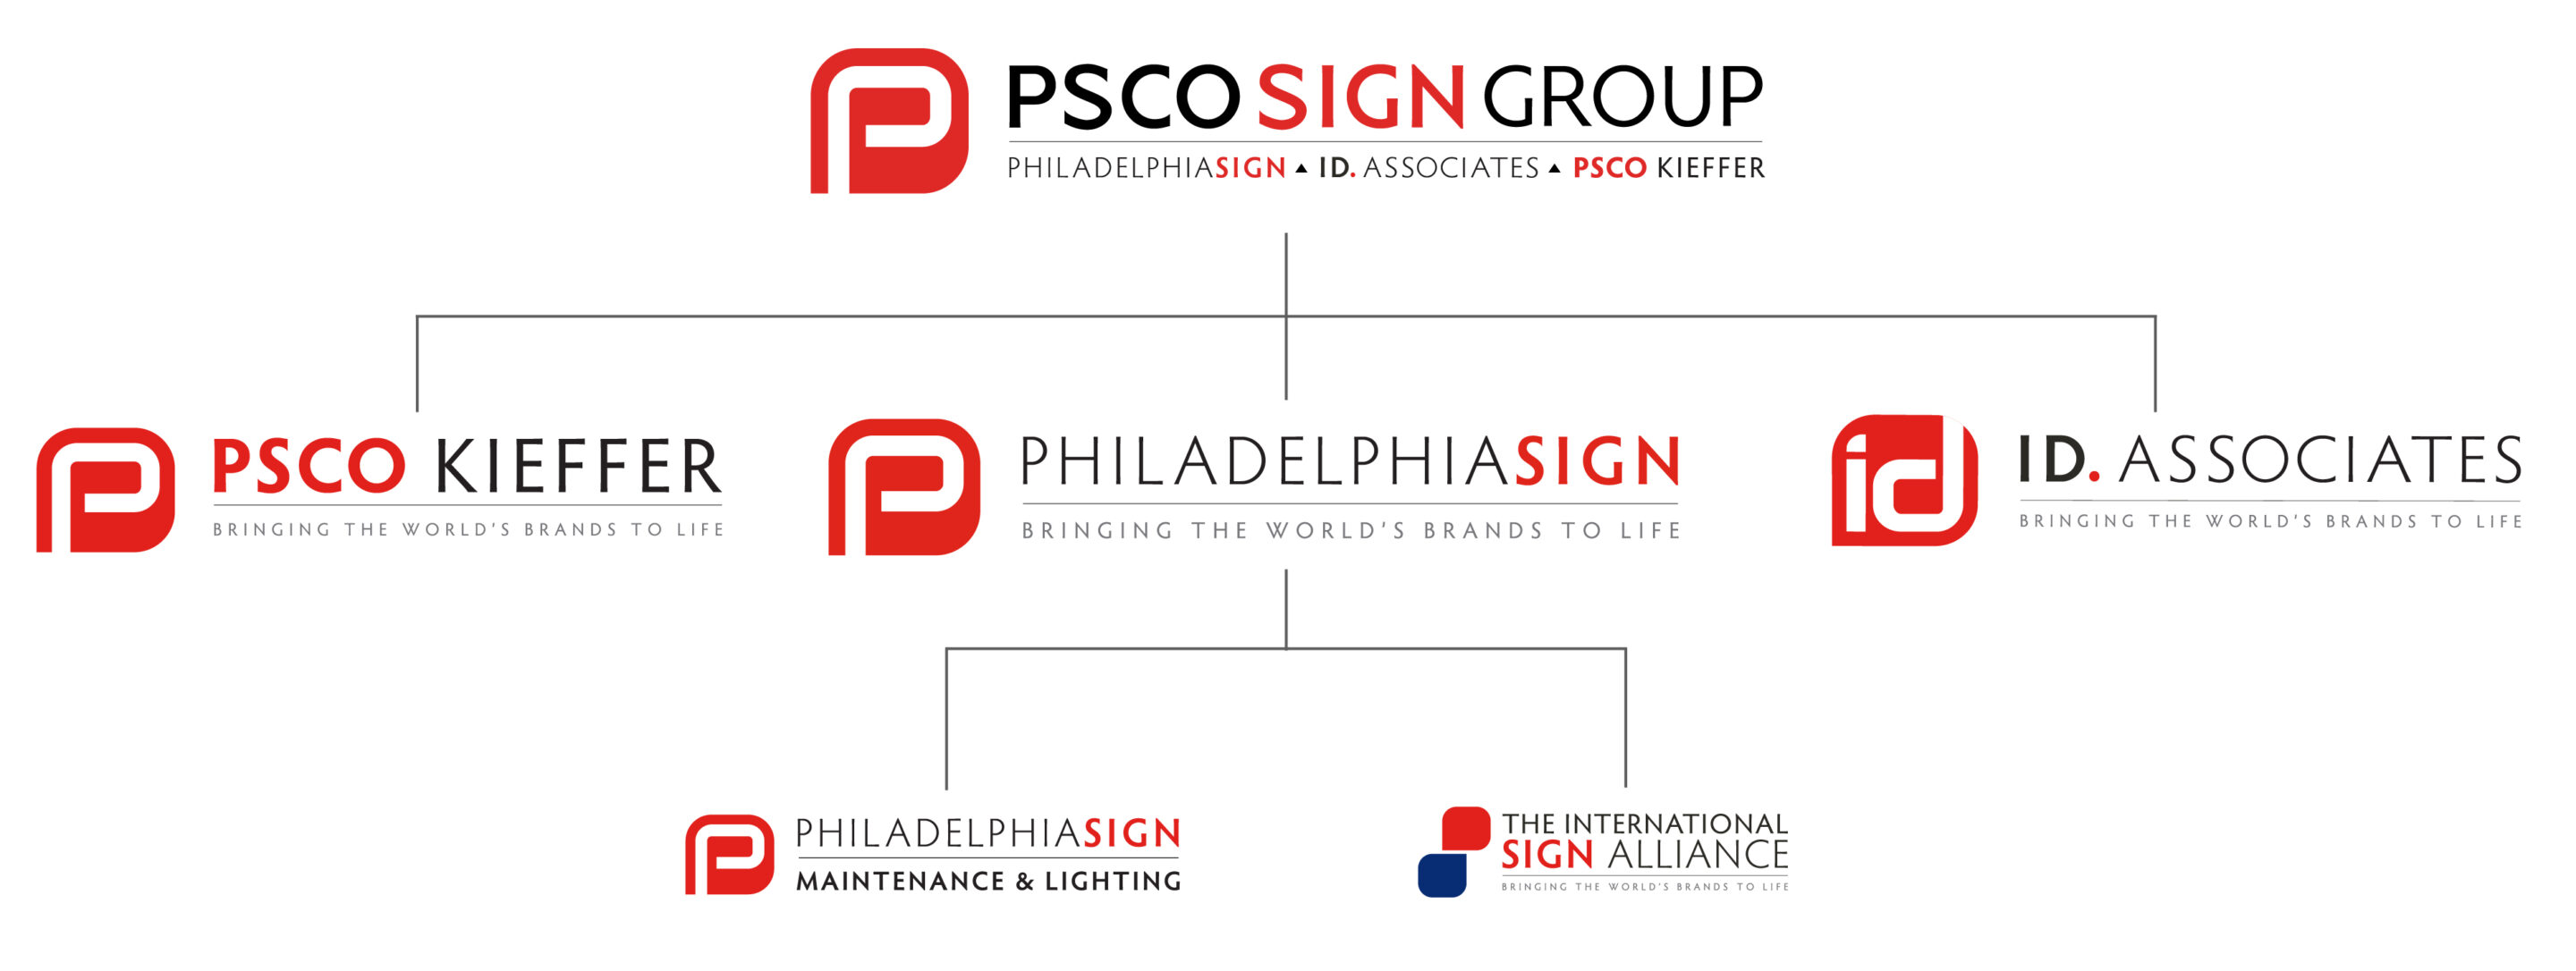 PSCO Sign Group Brands - Philadelphia Sign, ID Associates, Inc, and PSCO Kieffer along with PSCO Maintenance and LIghting and TISA